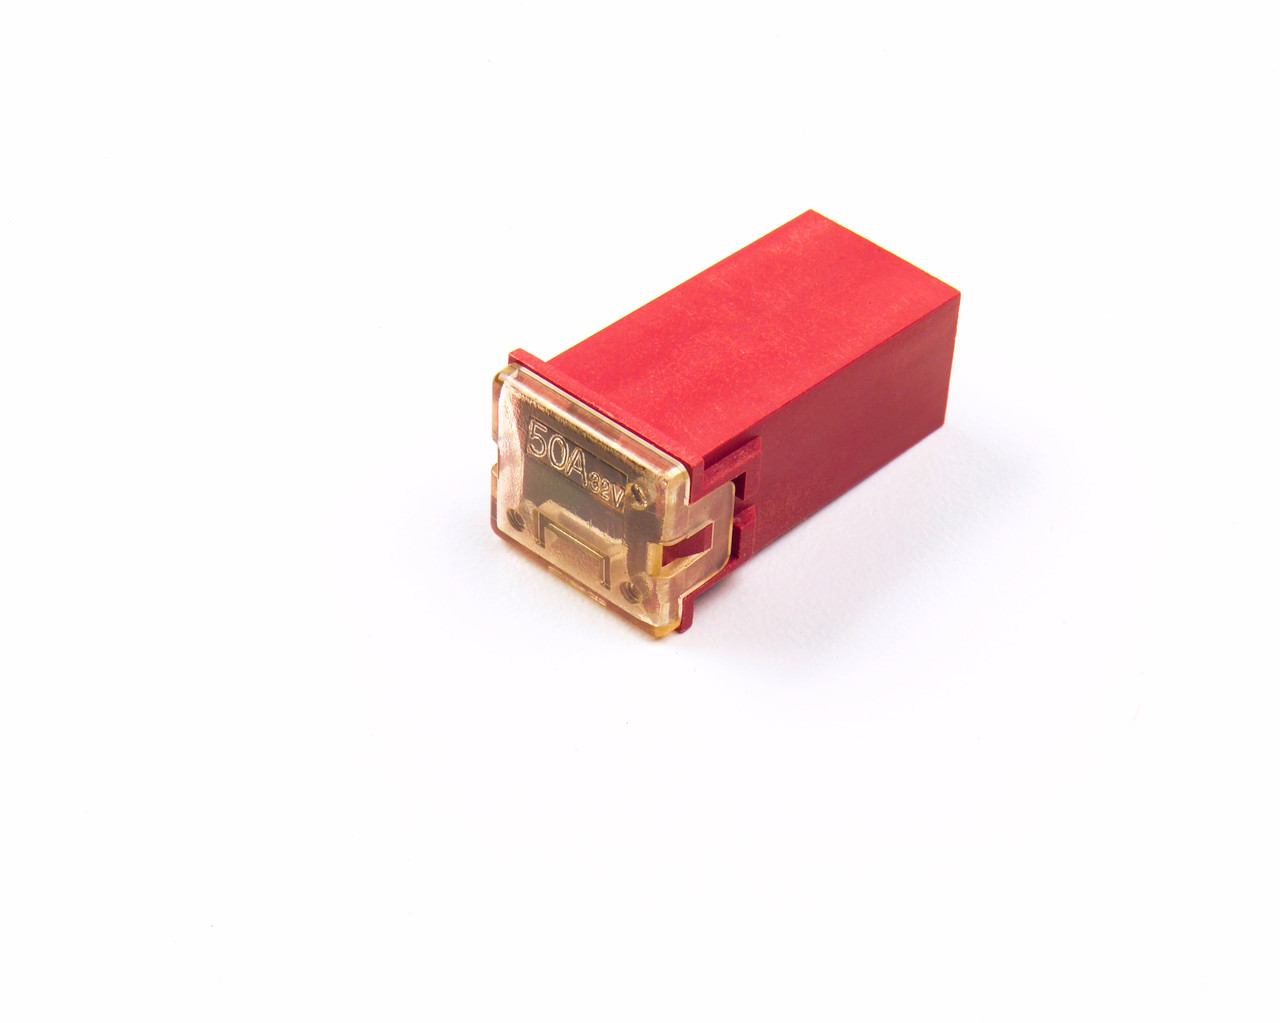 Cartridge "Link" Fuse 50A 32V - Red  82-FMX-50A